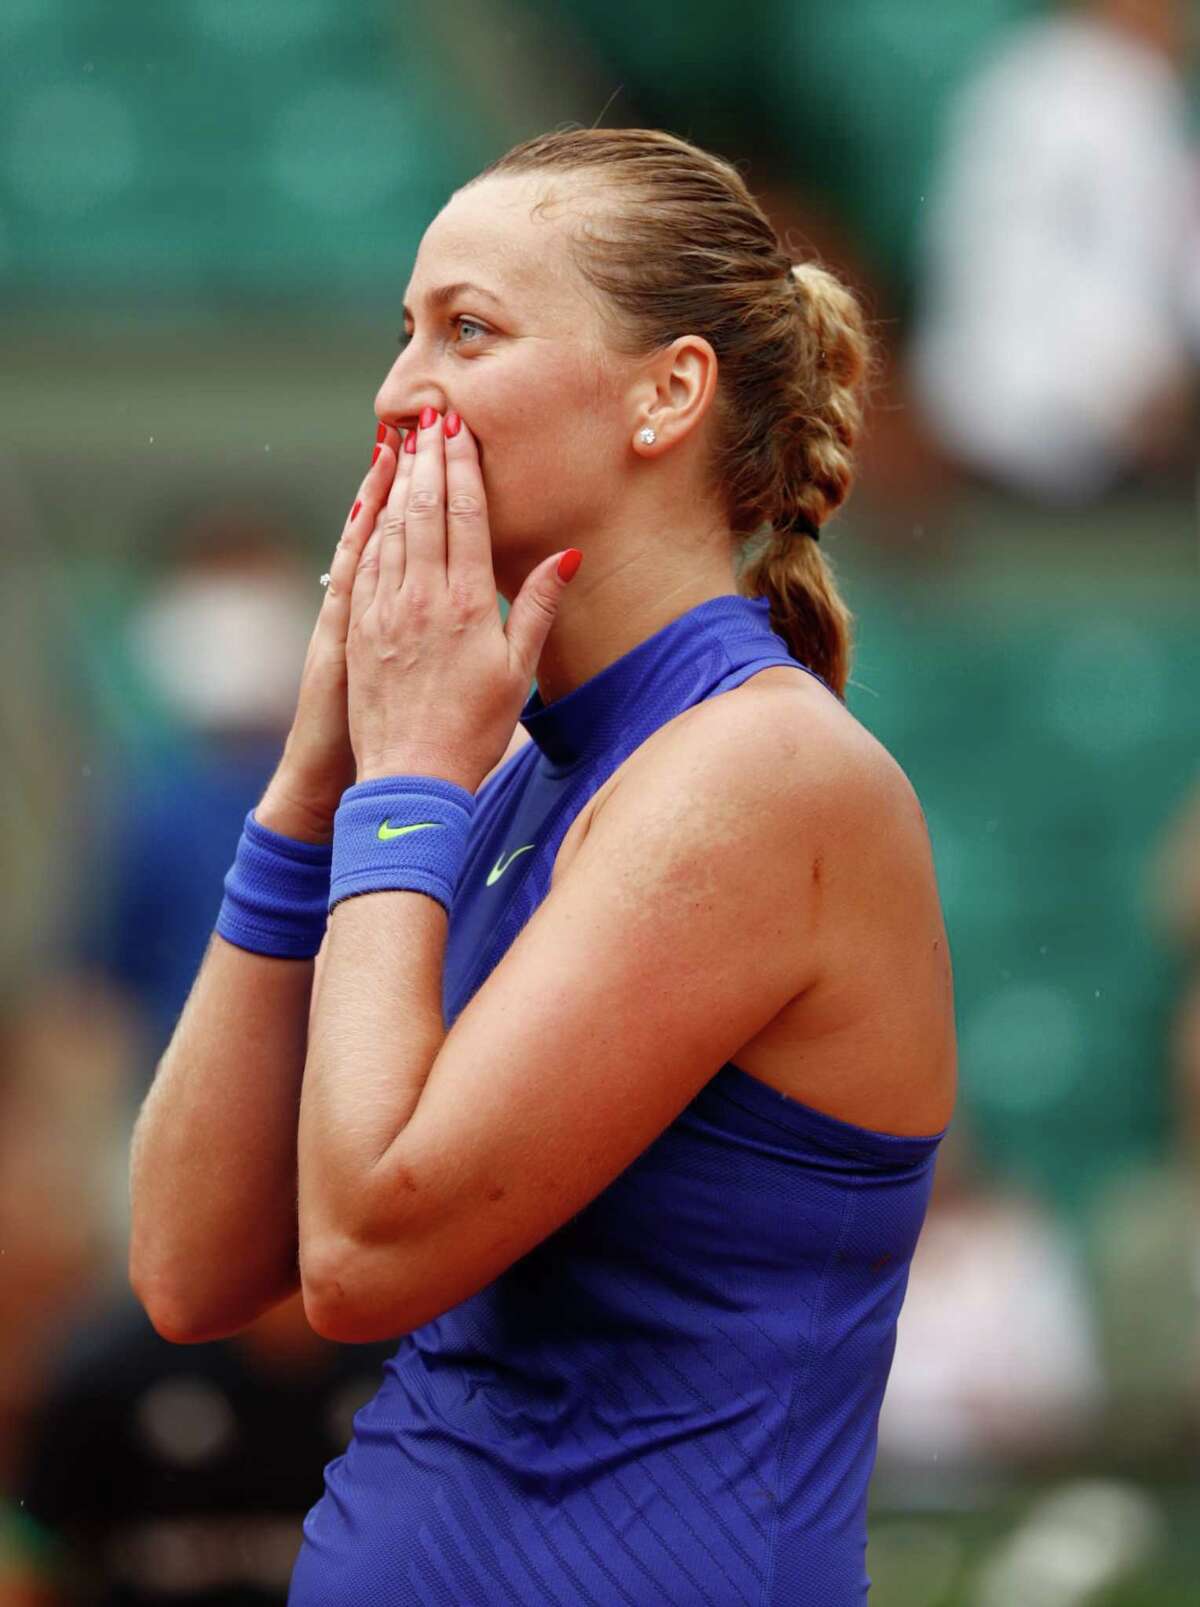 Petra Kvitova, playing for the first time since being stabbed in December, made a triumphant return to the court Sunday.